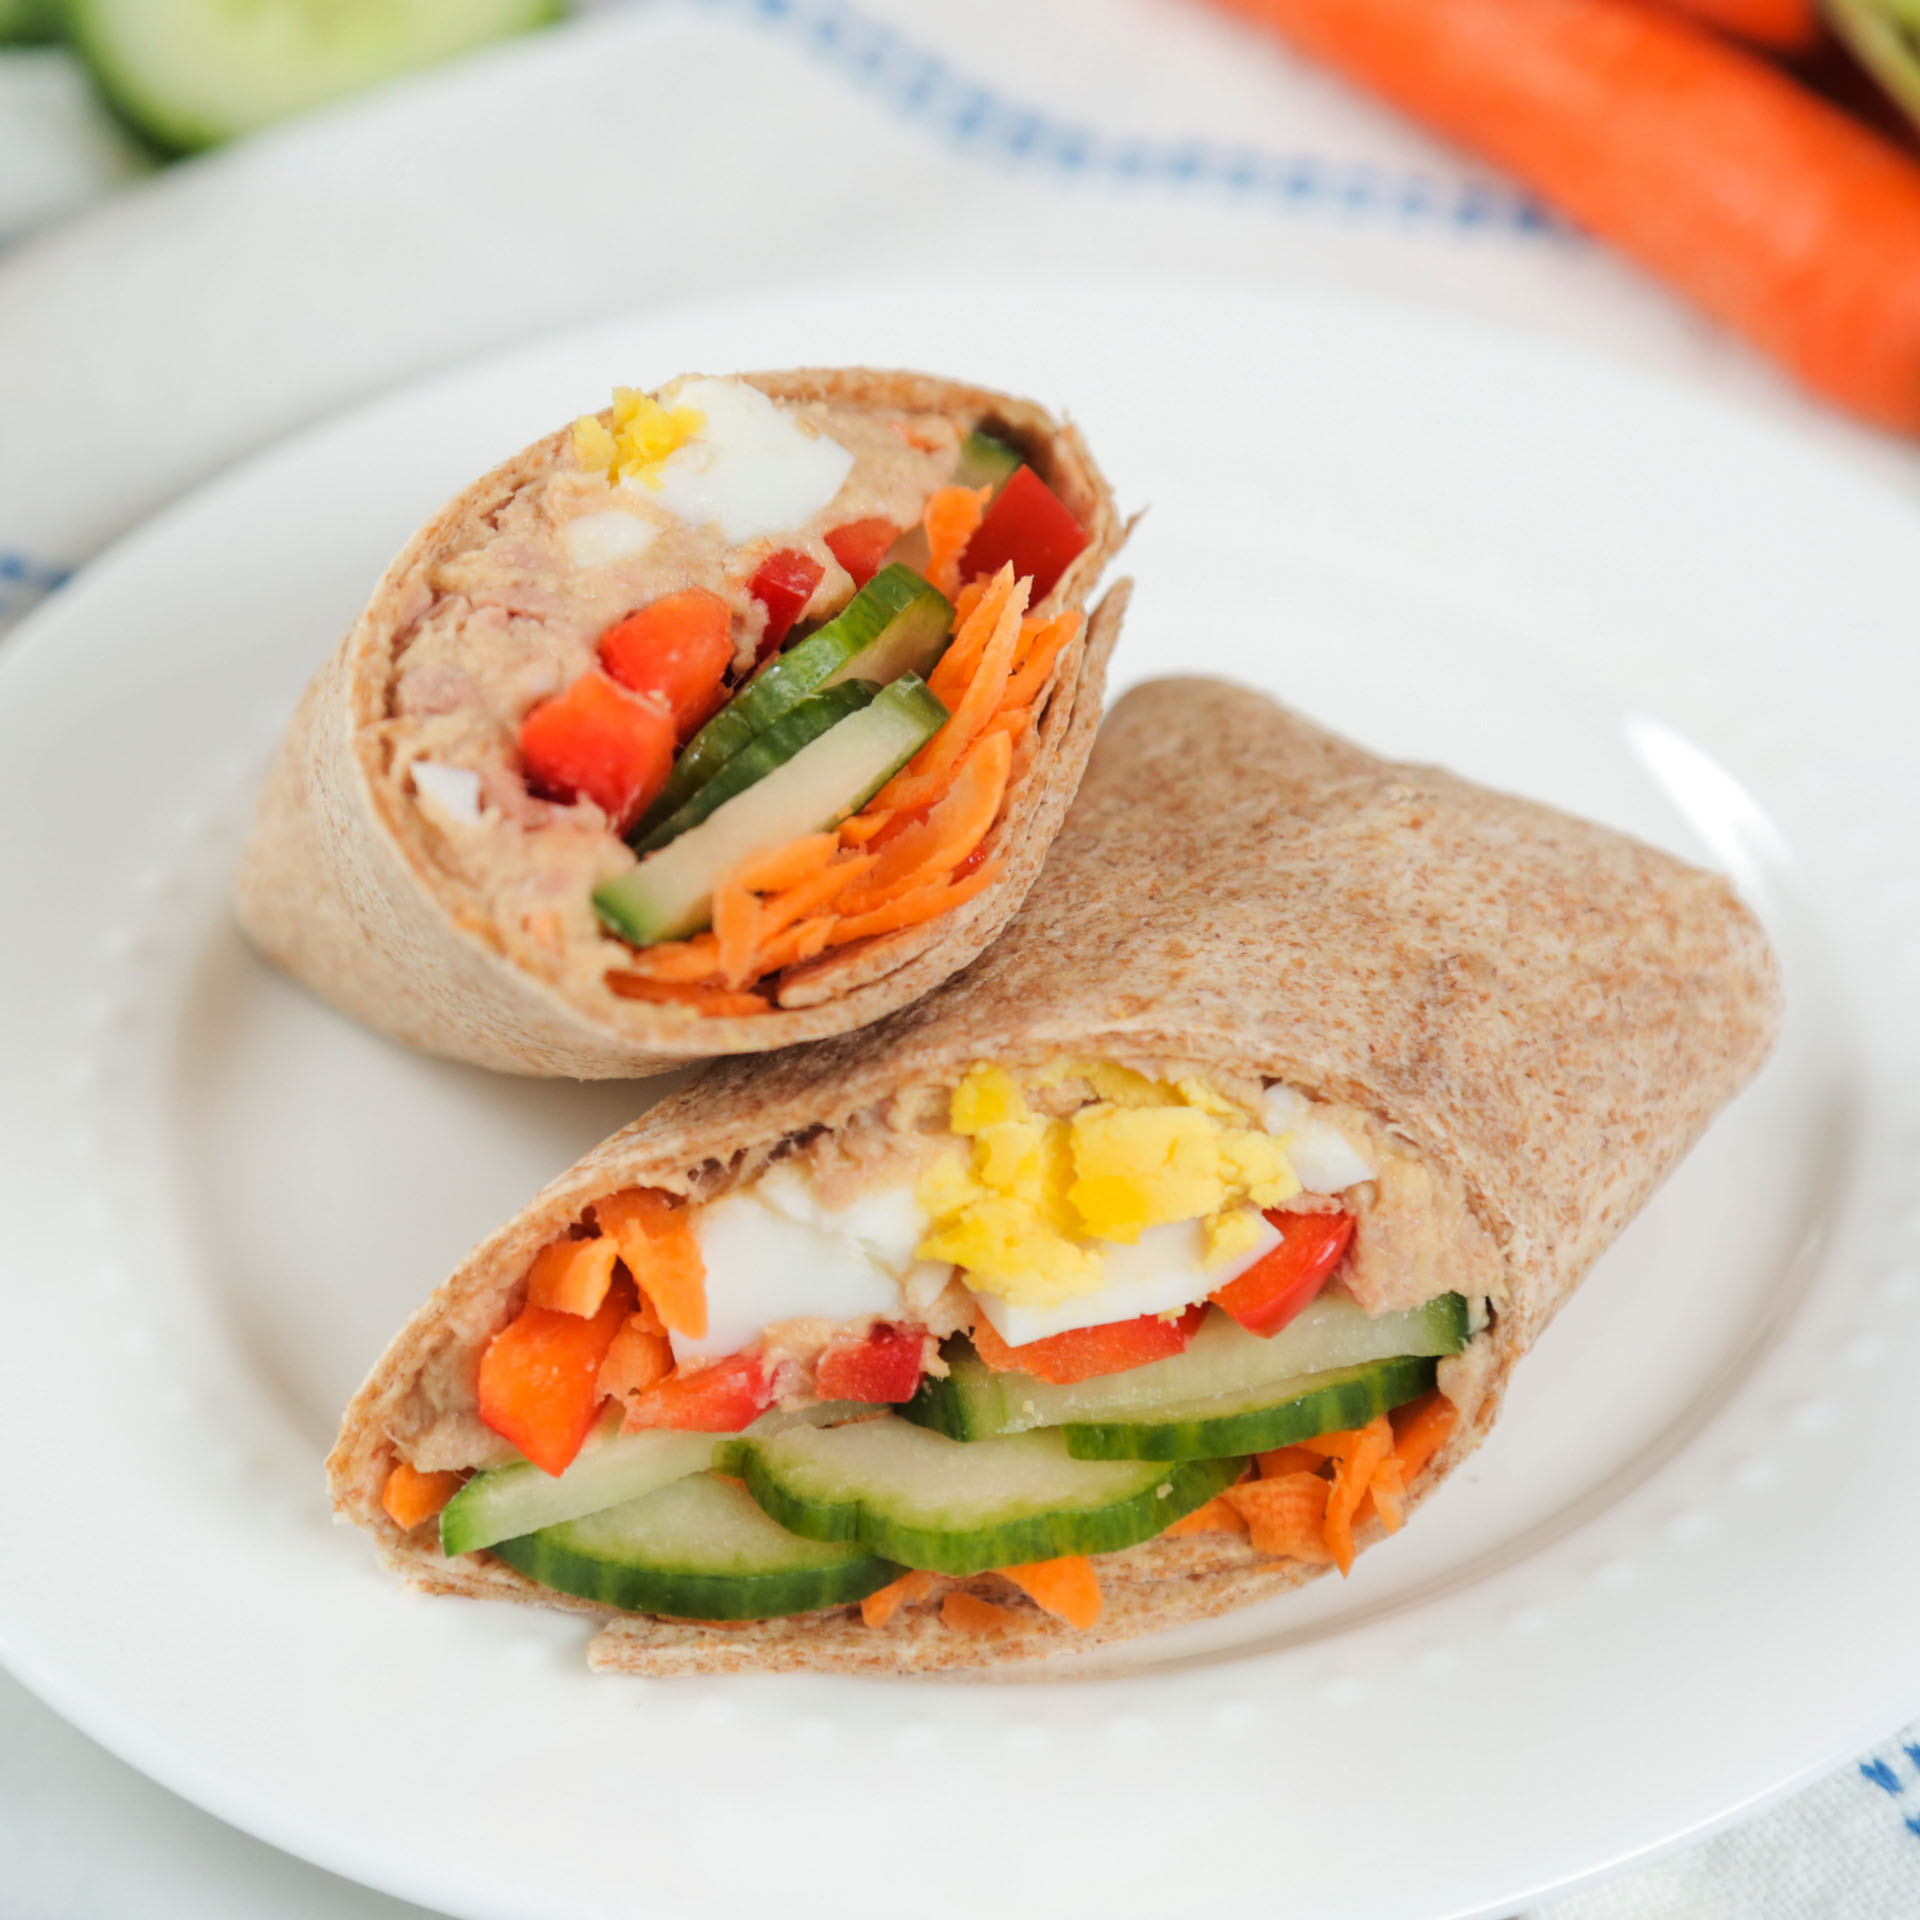 Crunchy Protein Power Wrap - The Domestic Geek